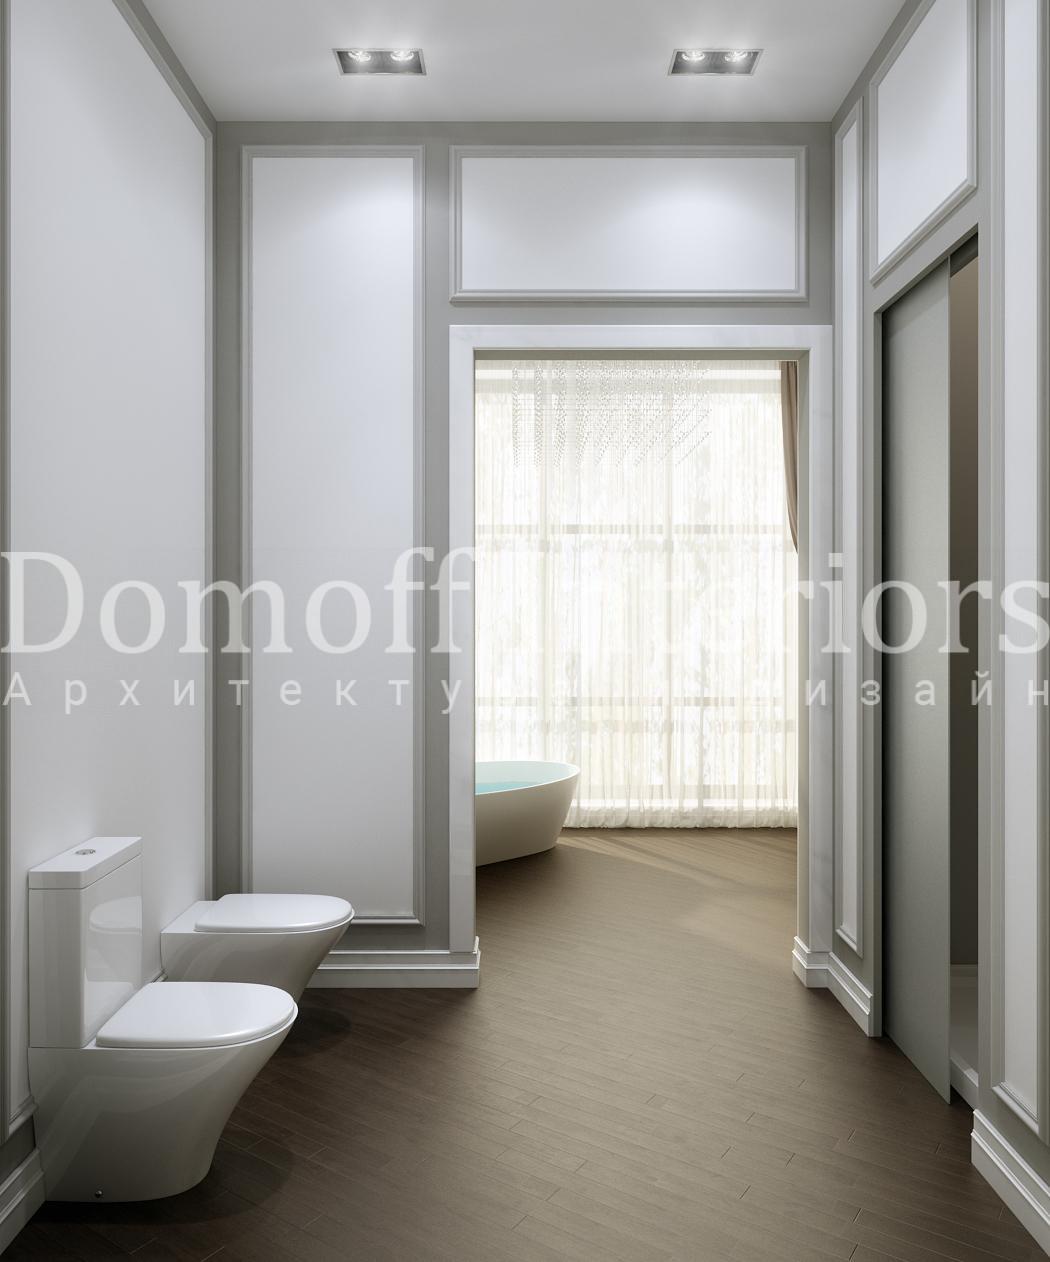 Bathroom No. 1 made in the style of Eclecticism Contemporary classics Neoclassicism